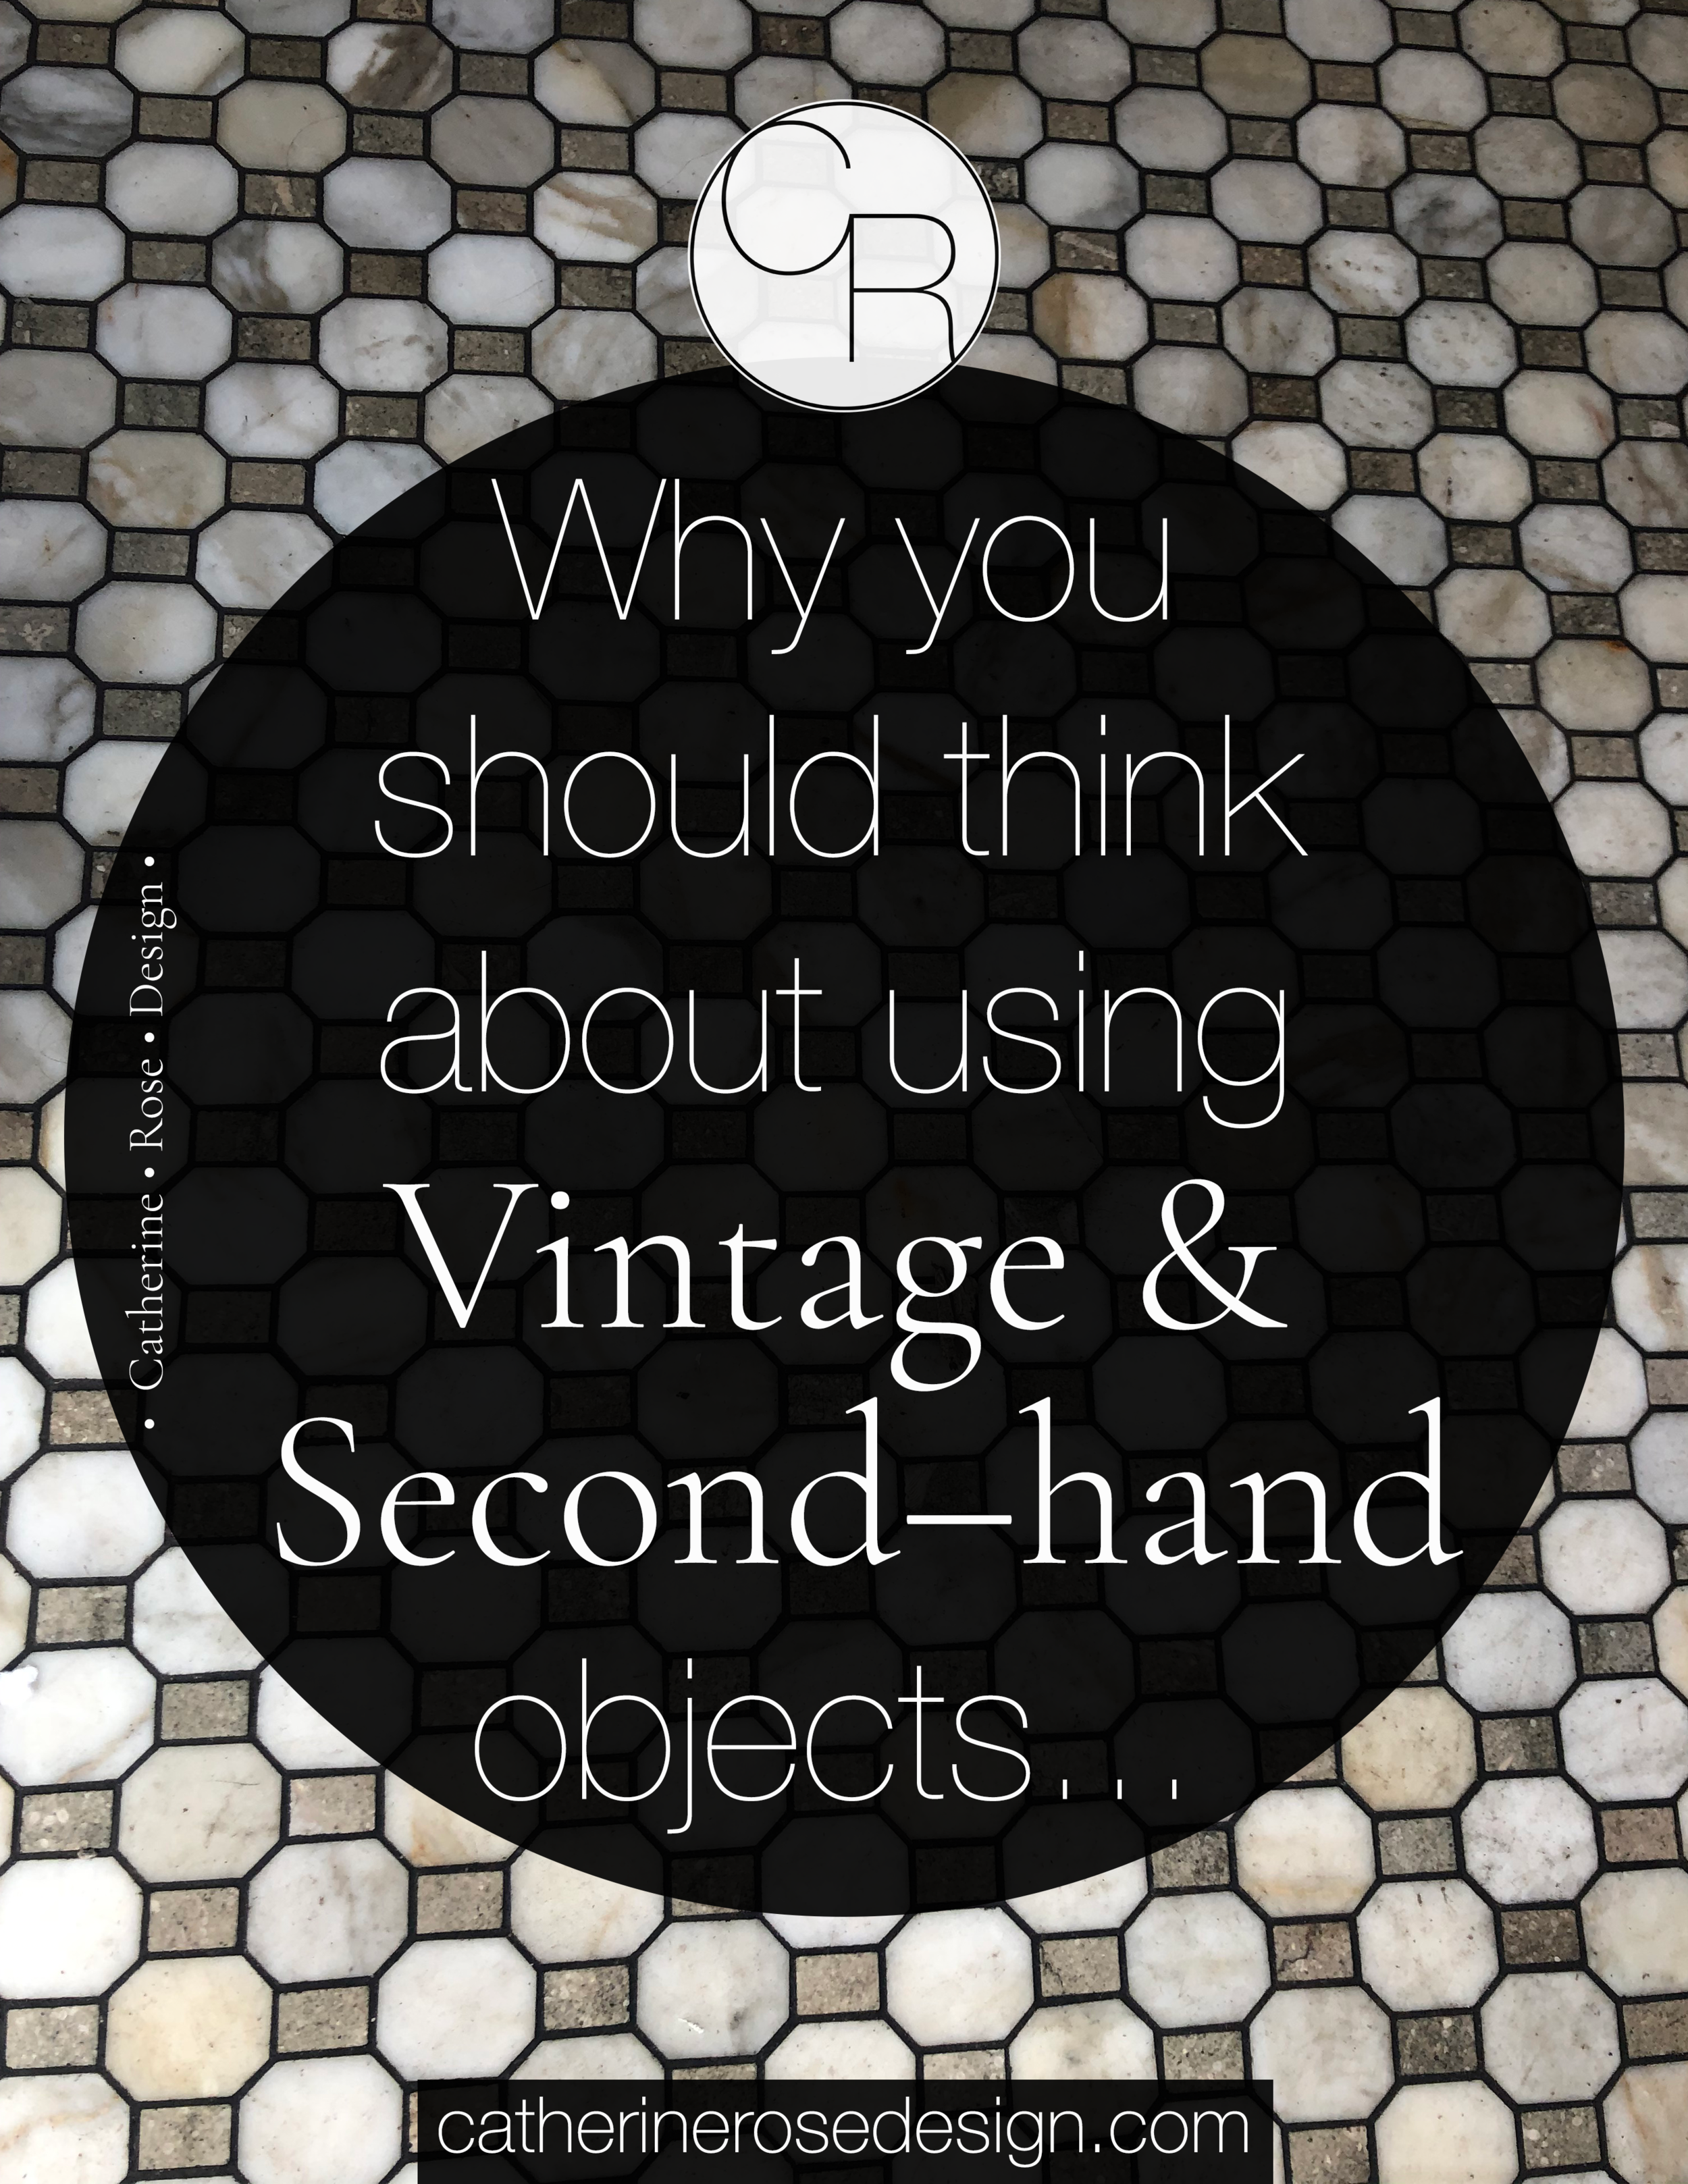 Why you should think about using vintage and second-hand objects (Copy) (Copy) (Copy) (Copy) (Copy) (Copy) (Copy) (Copy) (Copy) (Copy) (Copy)